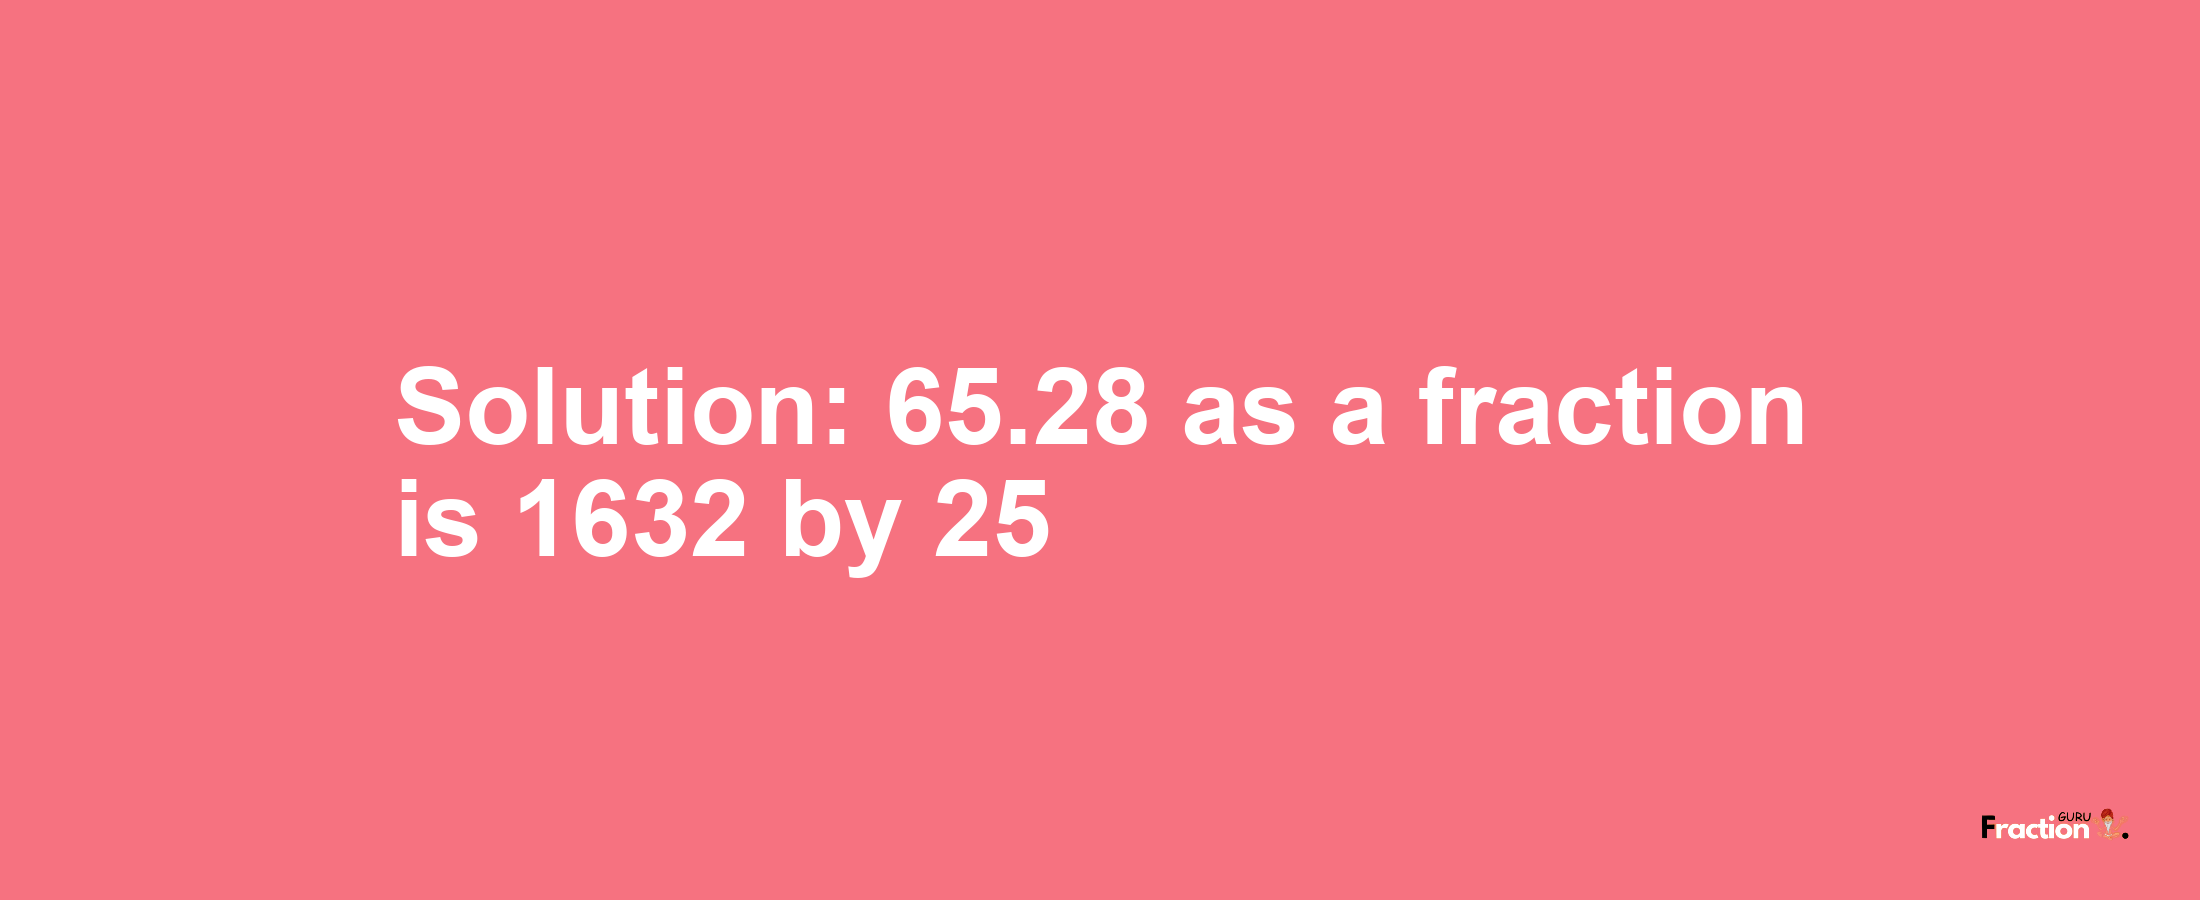 Solution:65.28 as a fraction is 1632/25